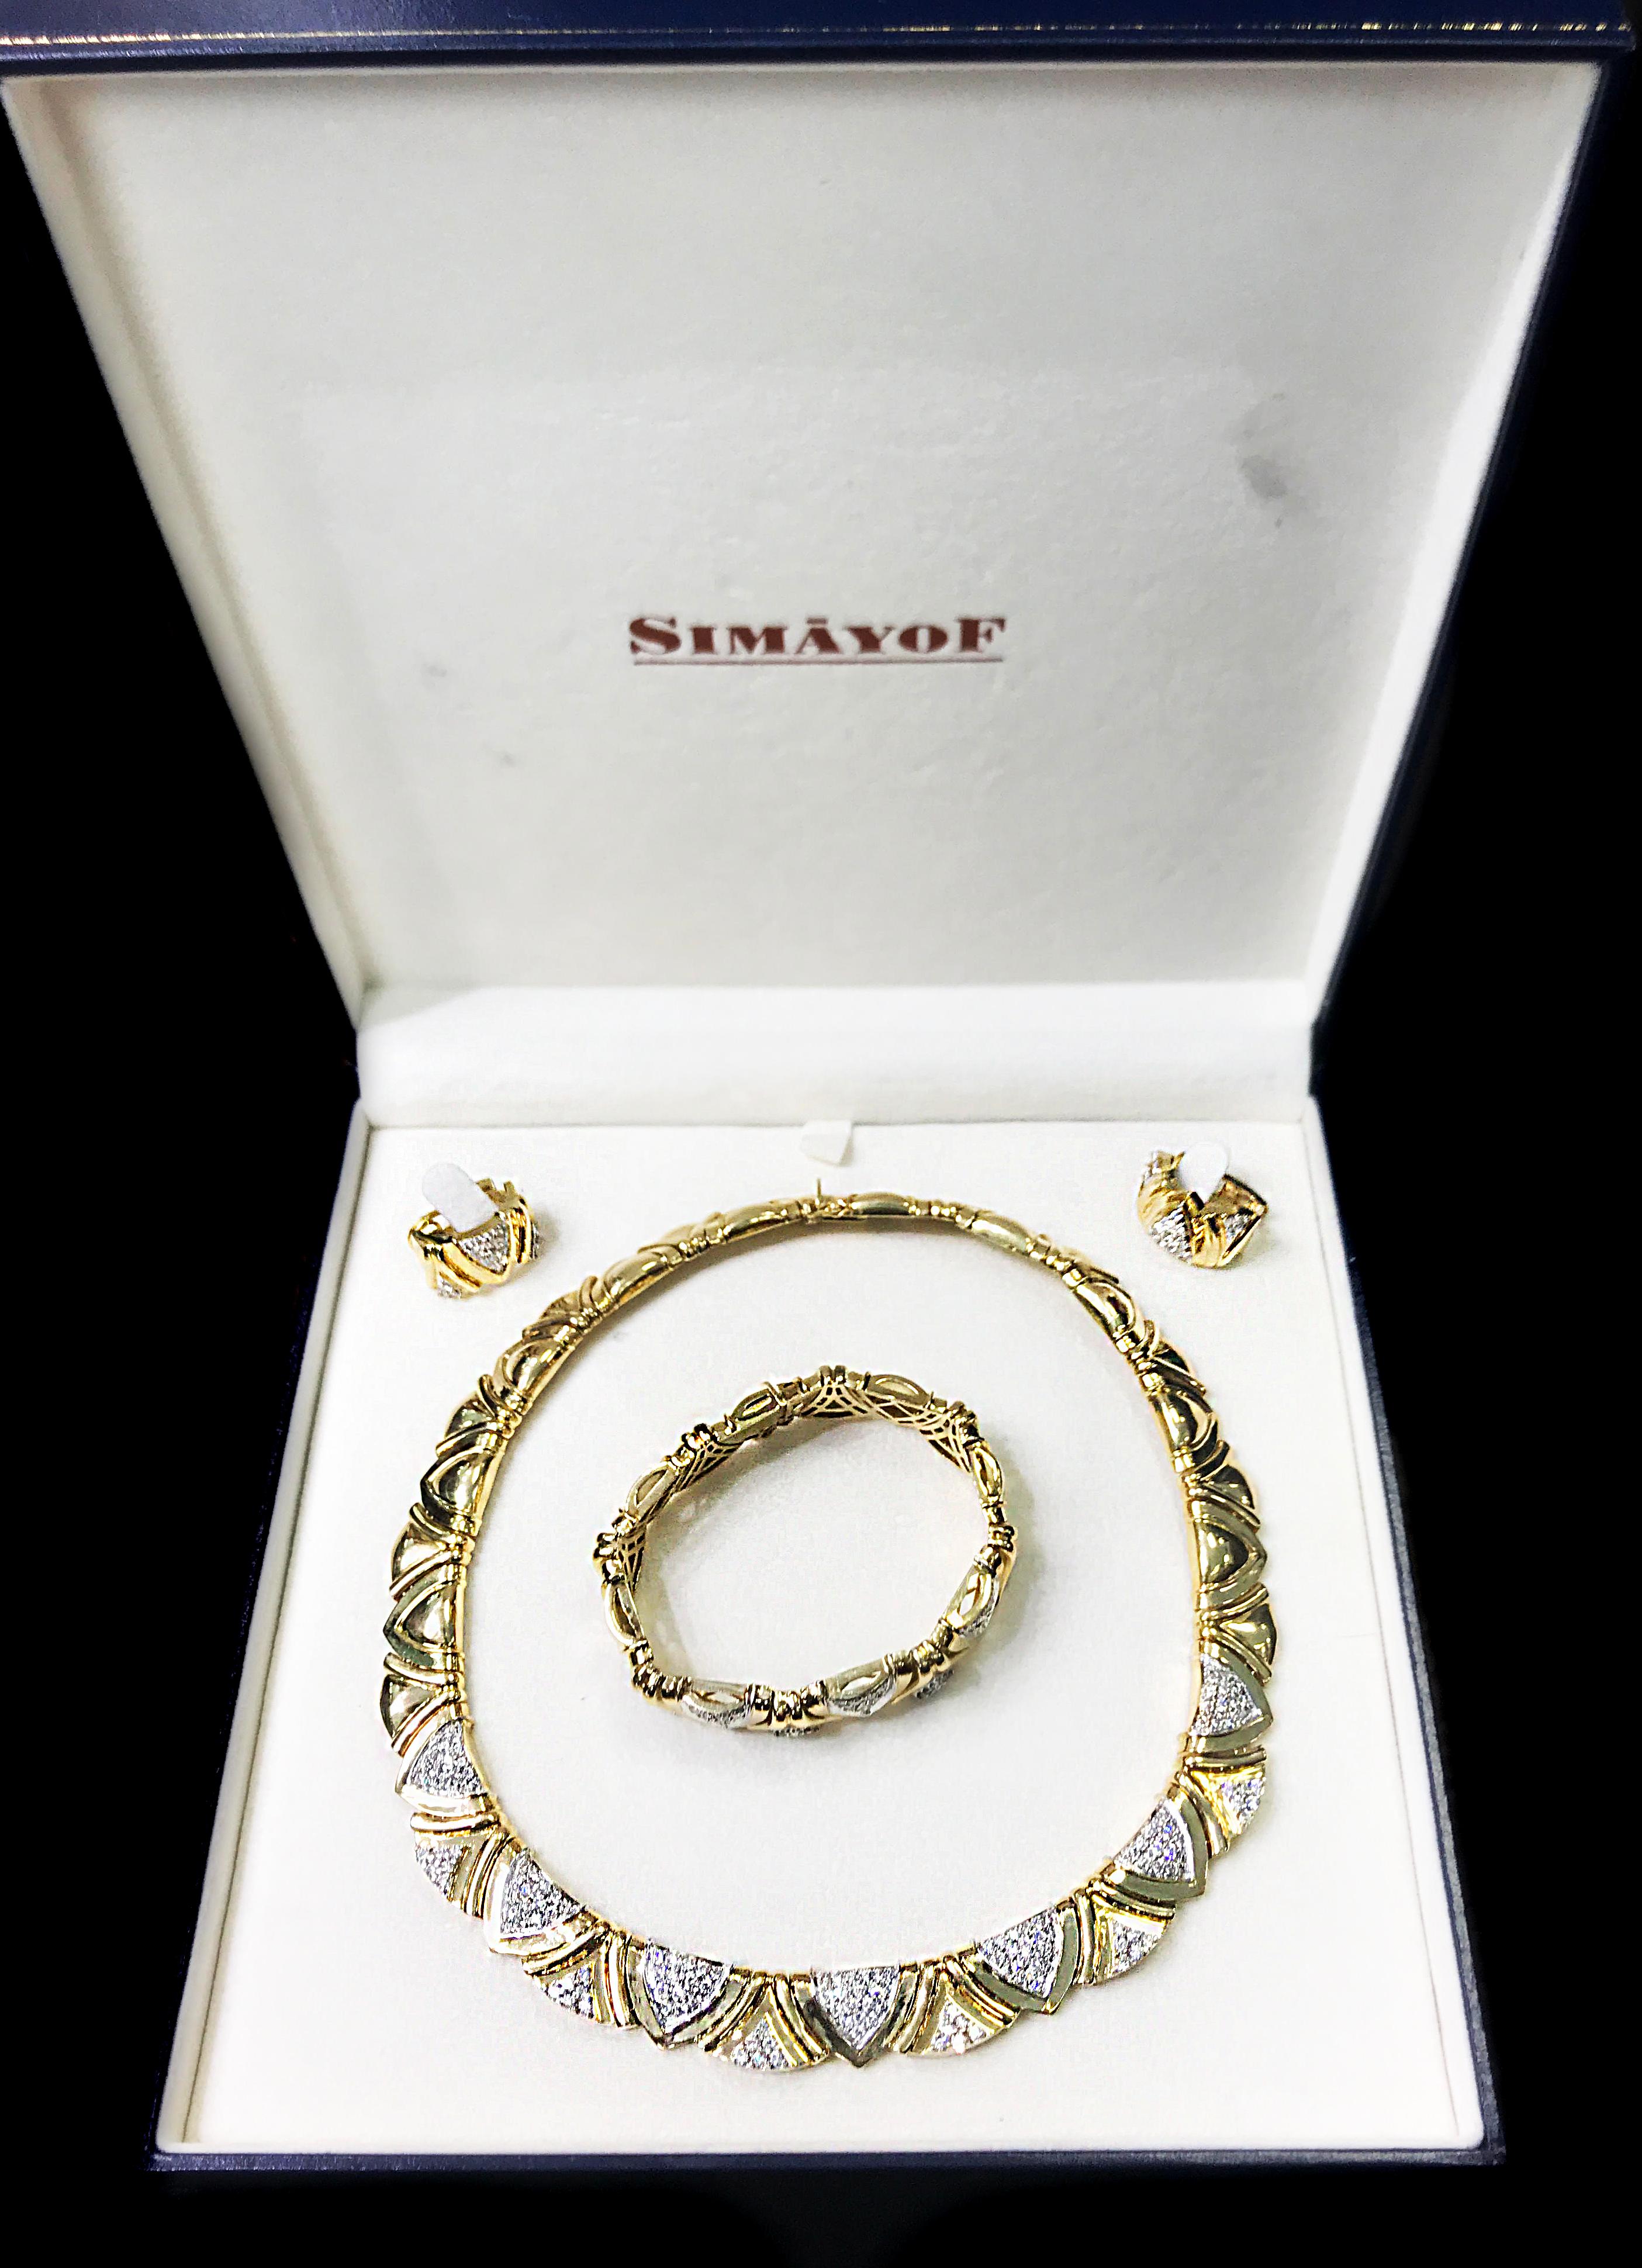 1980s Simayof Yellow Gold and Diamond Necklace Bracelet Earring Set 6